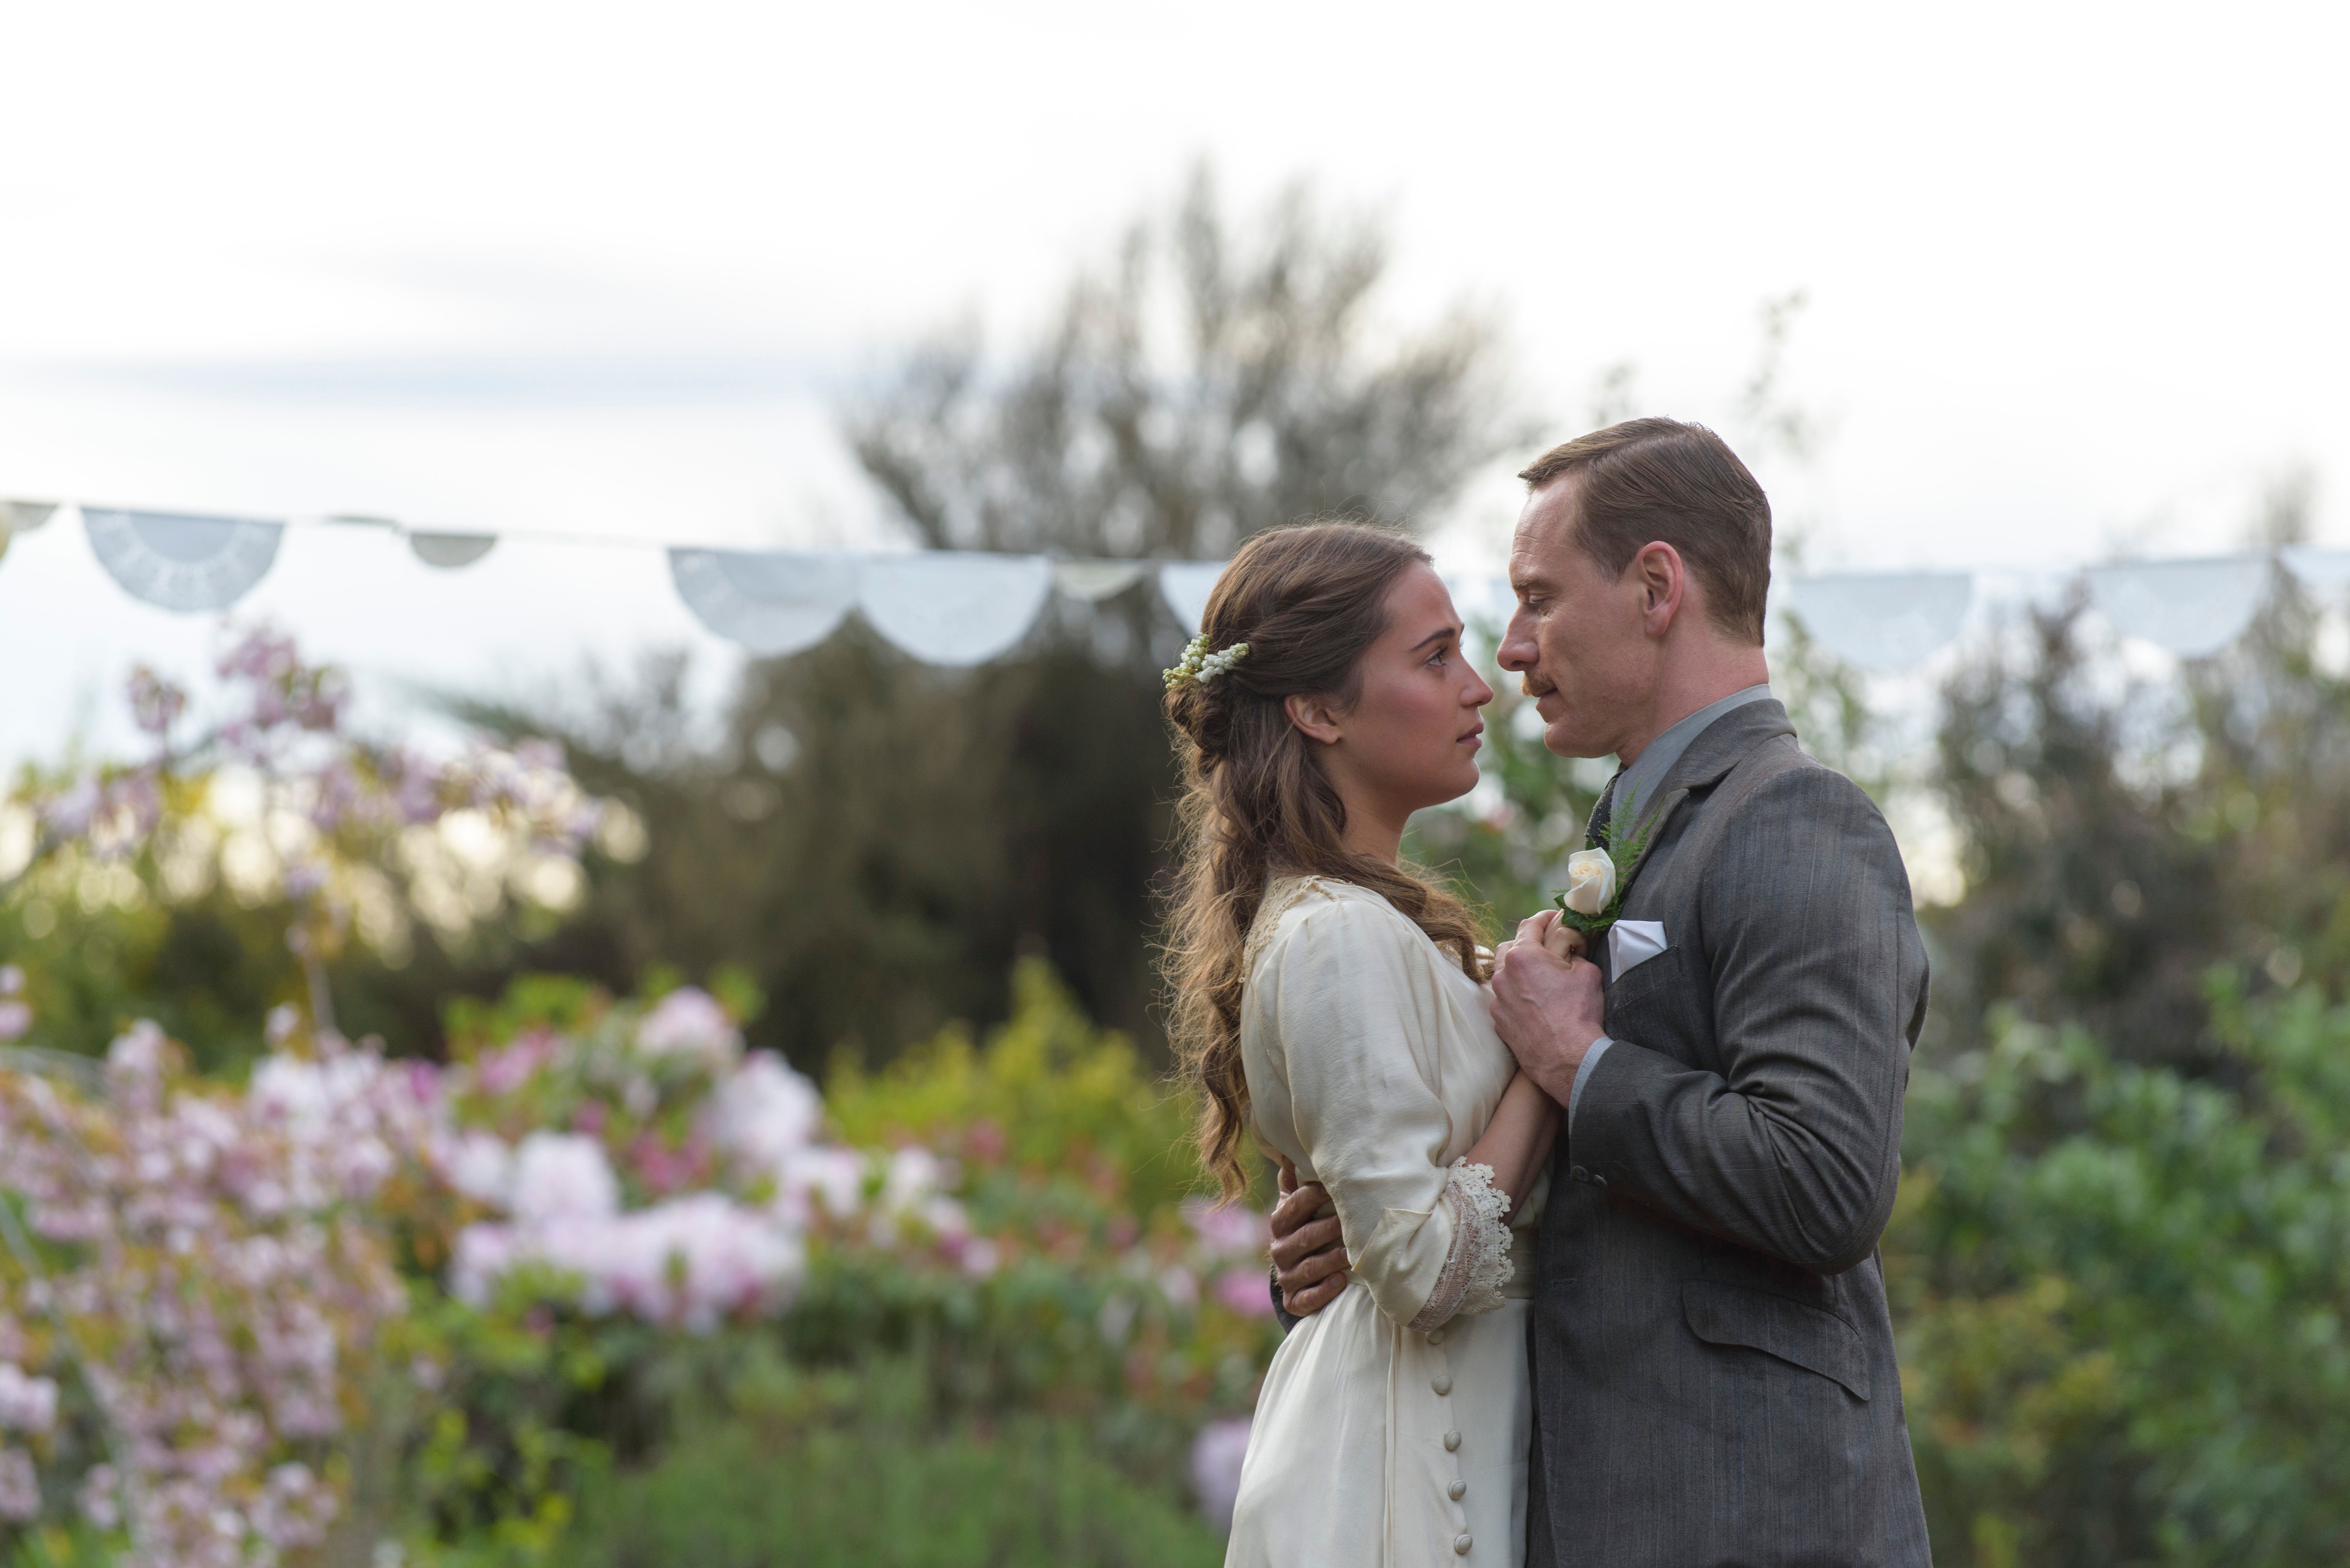 Michael and Alicia in the movie "The Light Between Oceans"